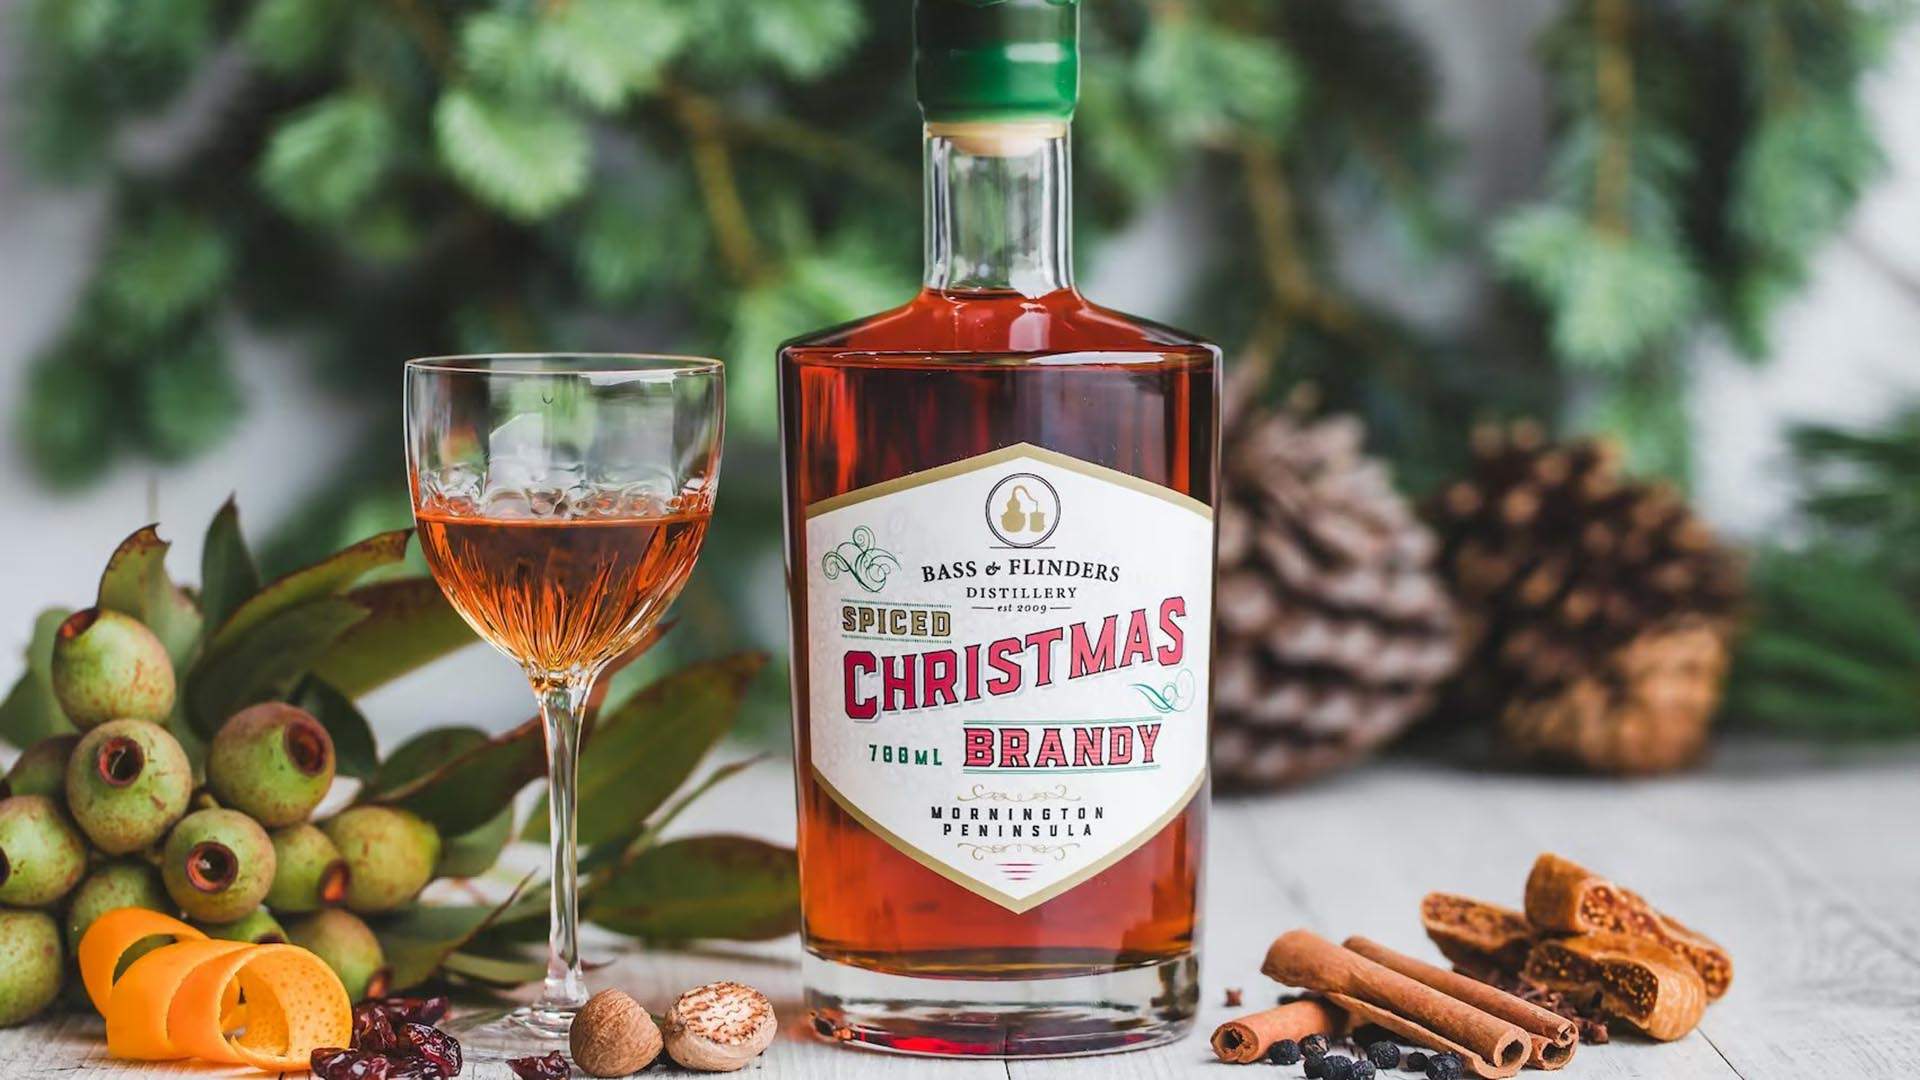 Bass and Flinders Has Released a Spiced Christmas Brandy If You Need Something to Sip with Pudding